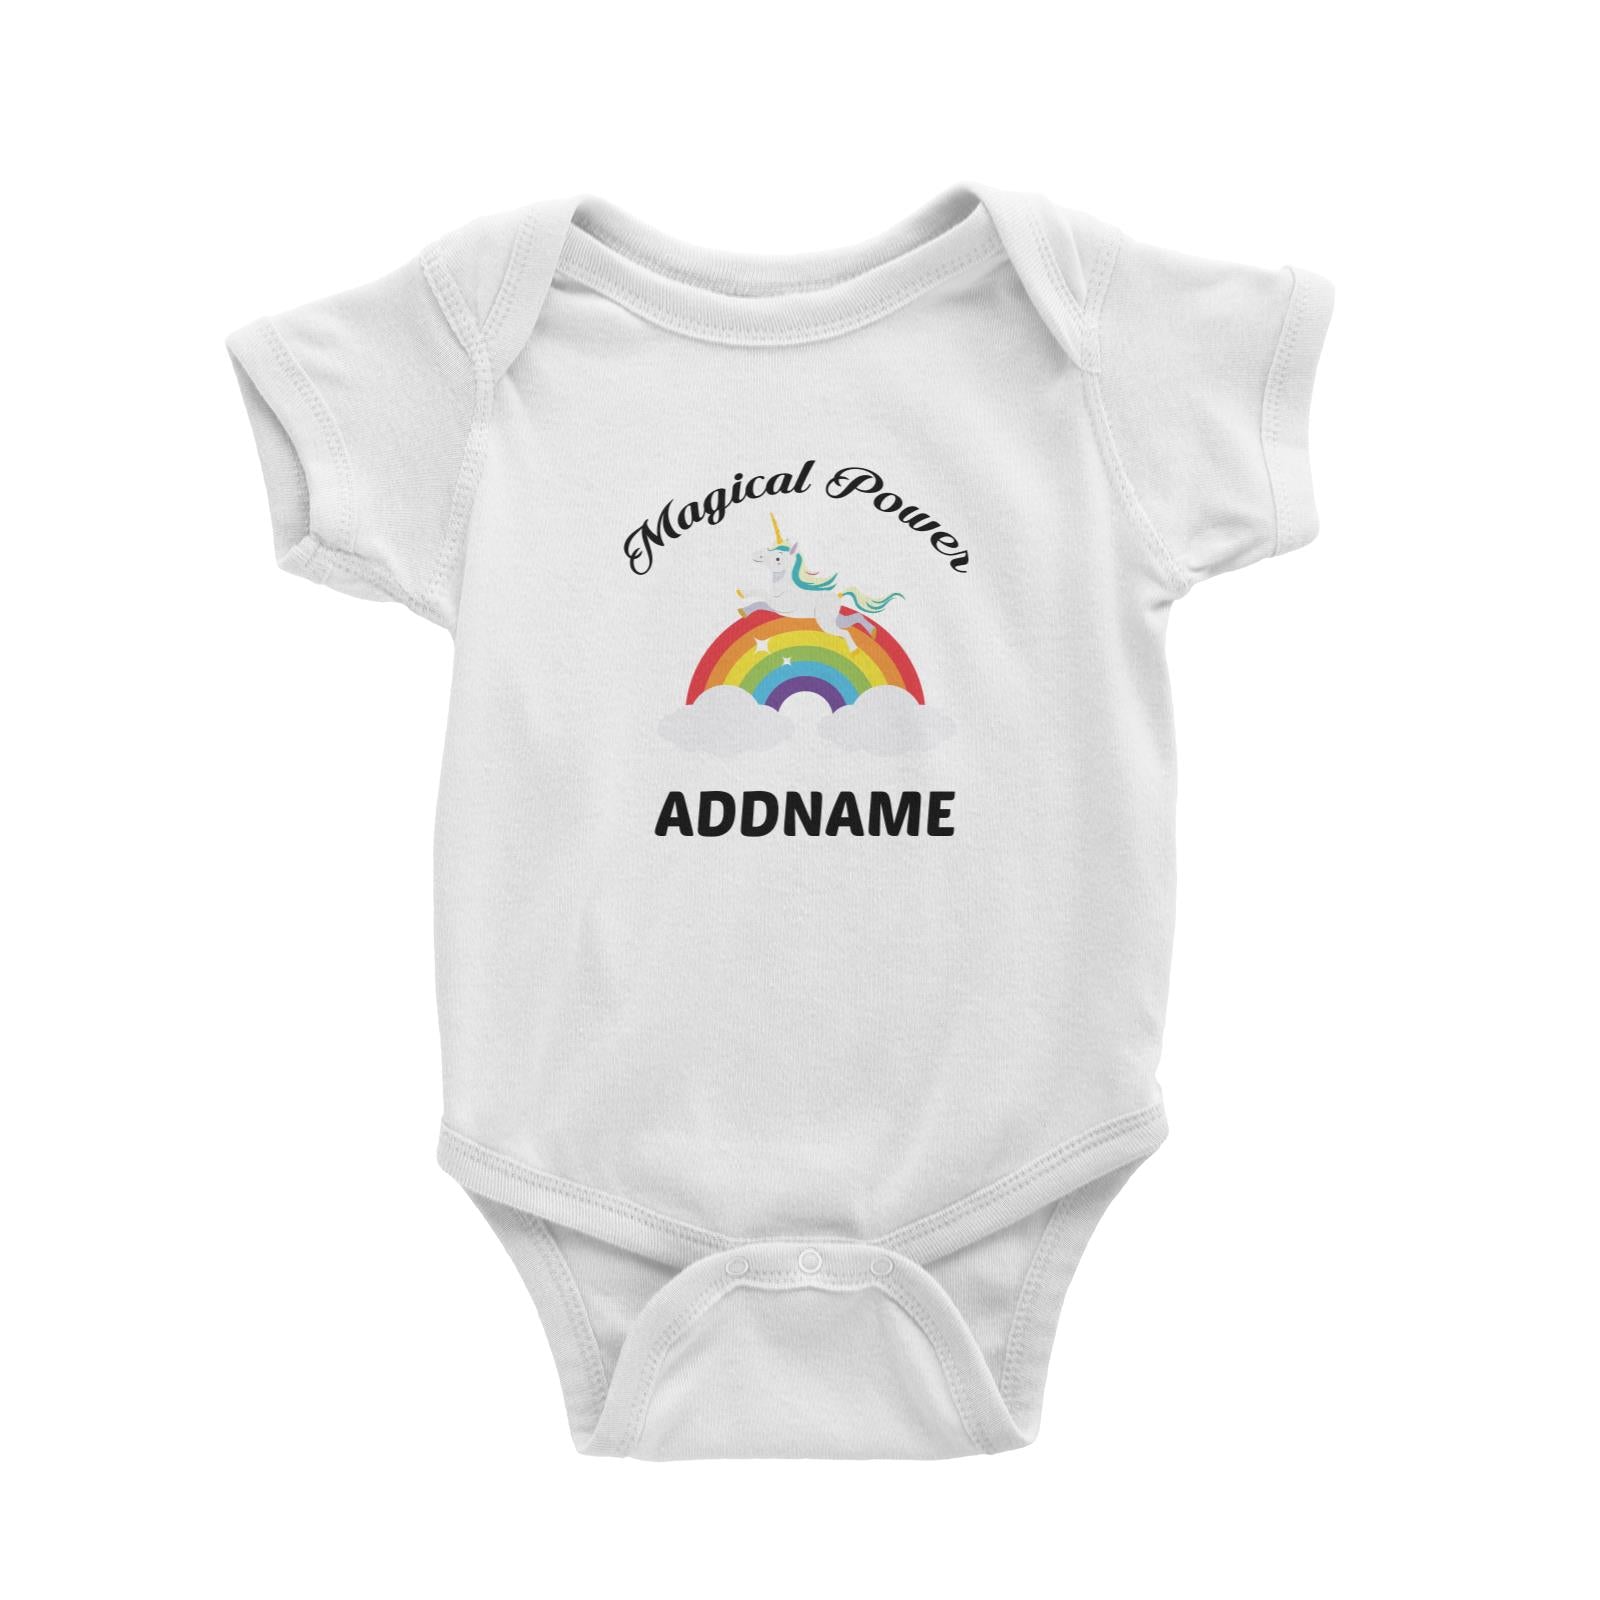 Unicorn Magical Power Addname Baby Romper